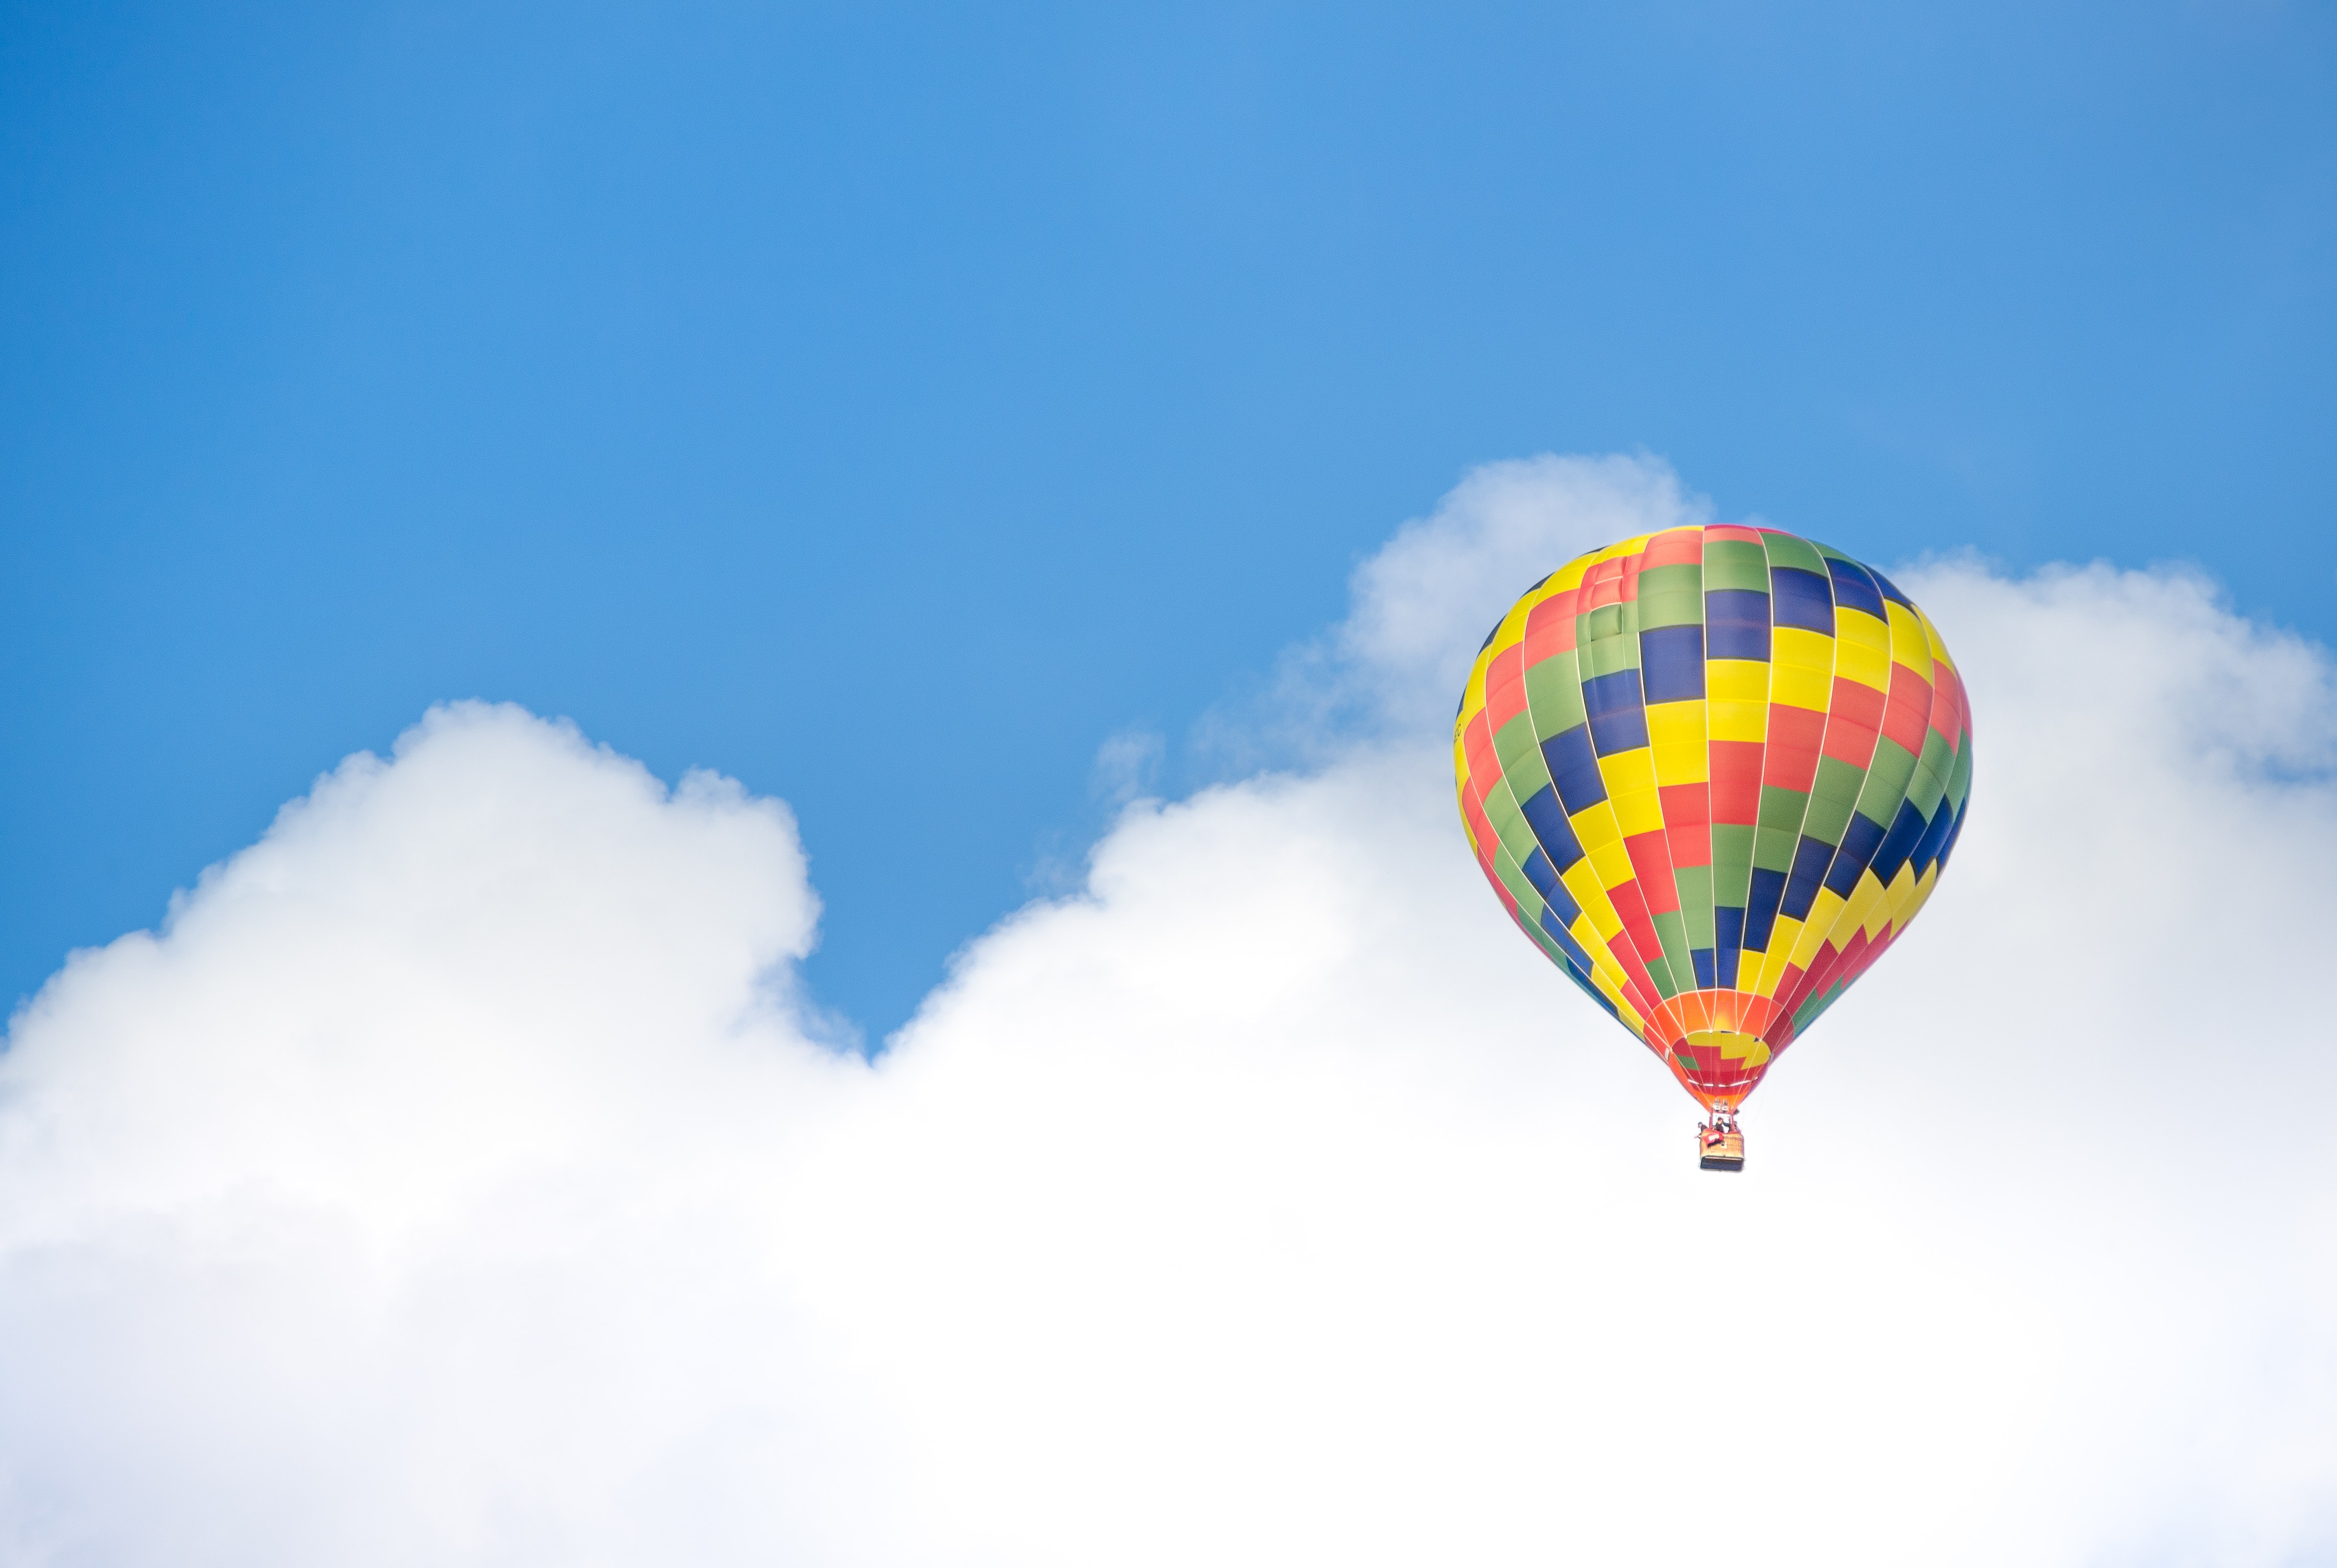 Yellow blue and green hot air balloon flying near white clouds photo